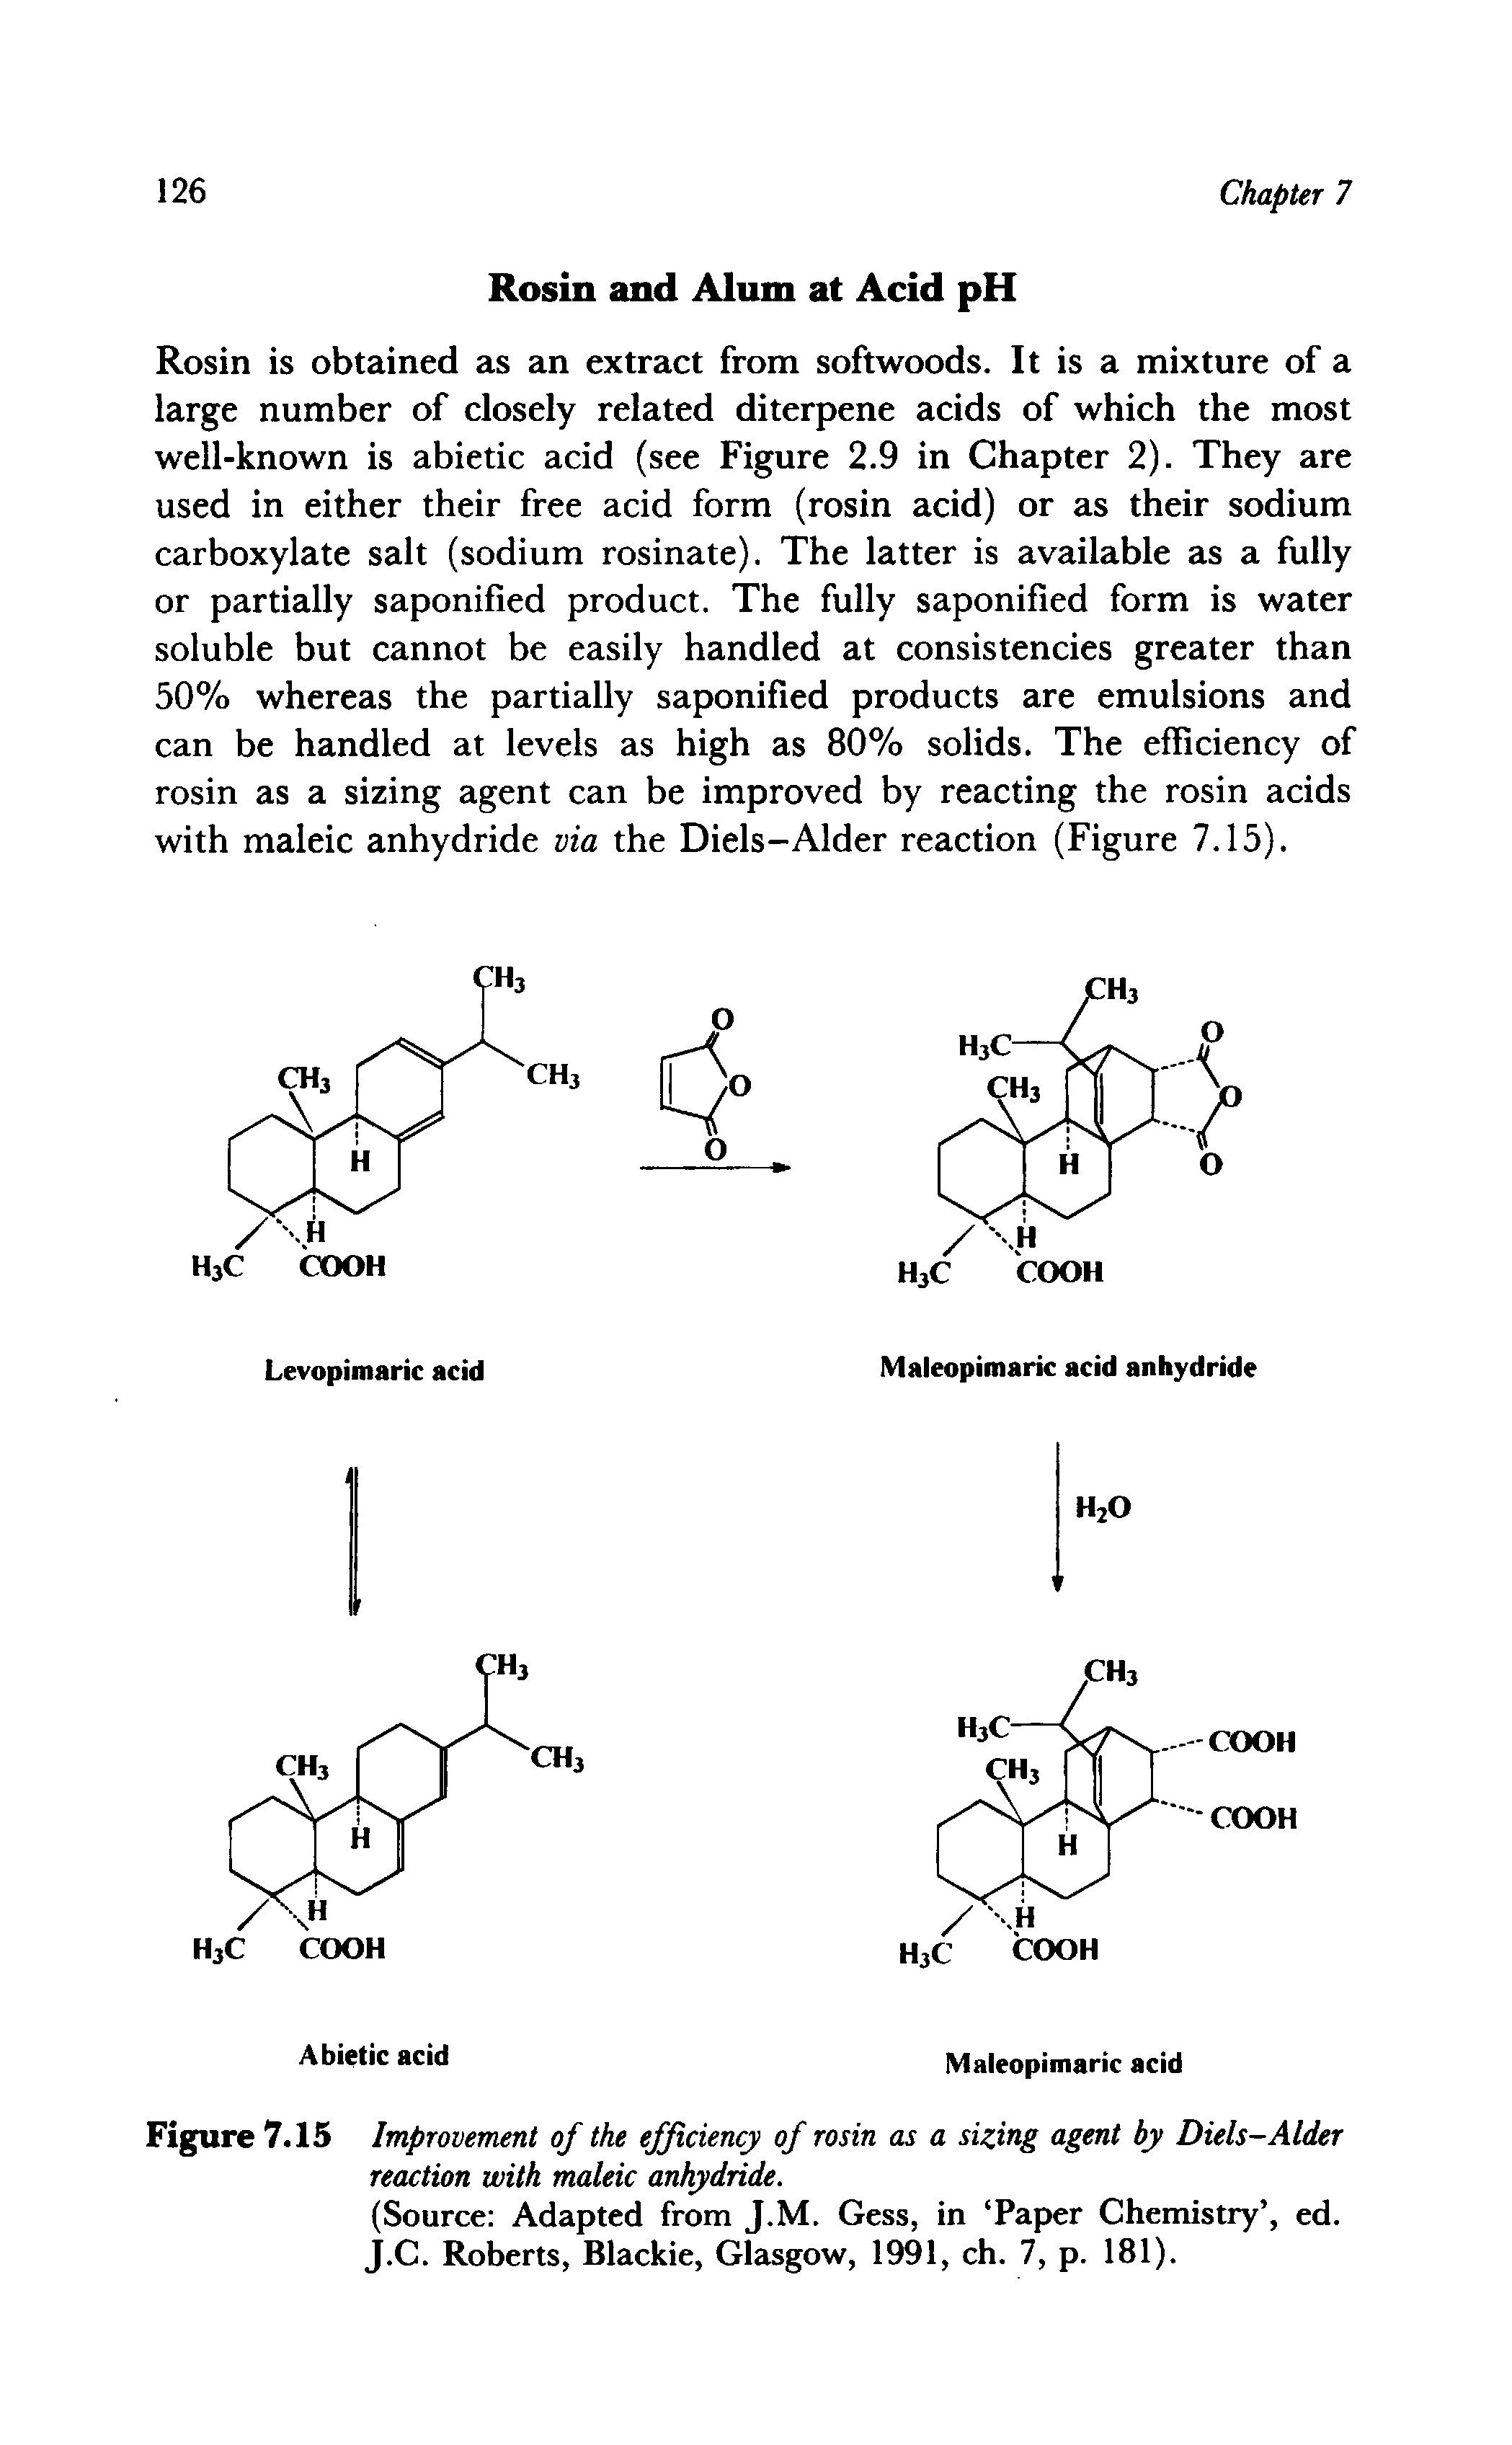 Figure 7.15 Improvement of the efficiency of rosin as a sizing agent by Diels-Alder reaction with maleic anhydride.